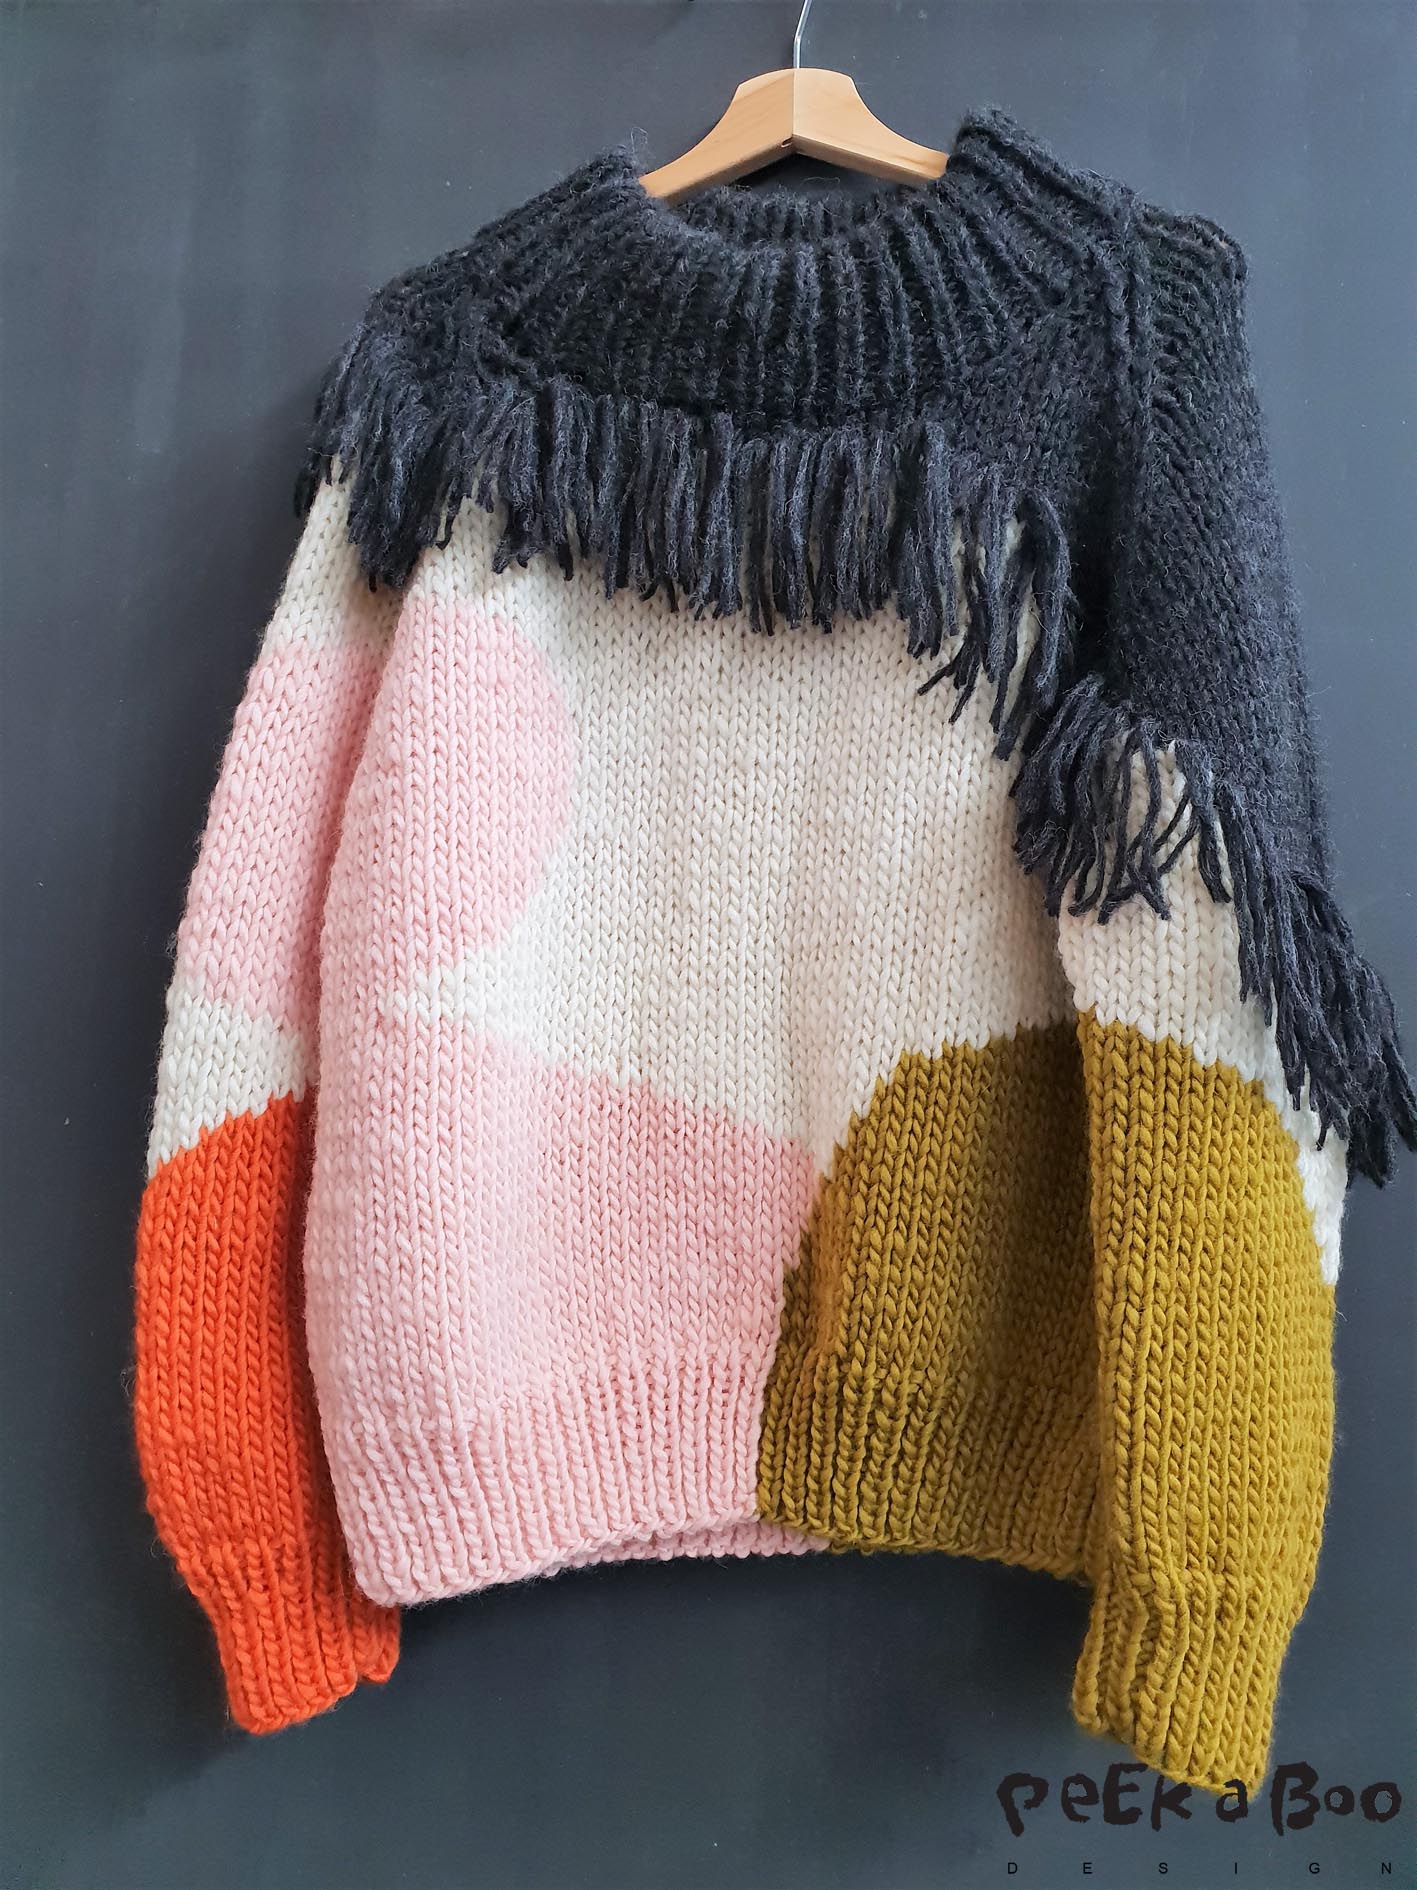 Handkknitted sweaters with a lot of creativity and fantastic colourcombinations.